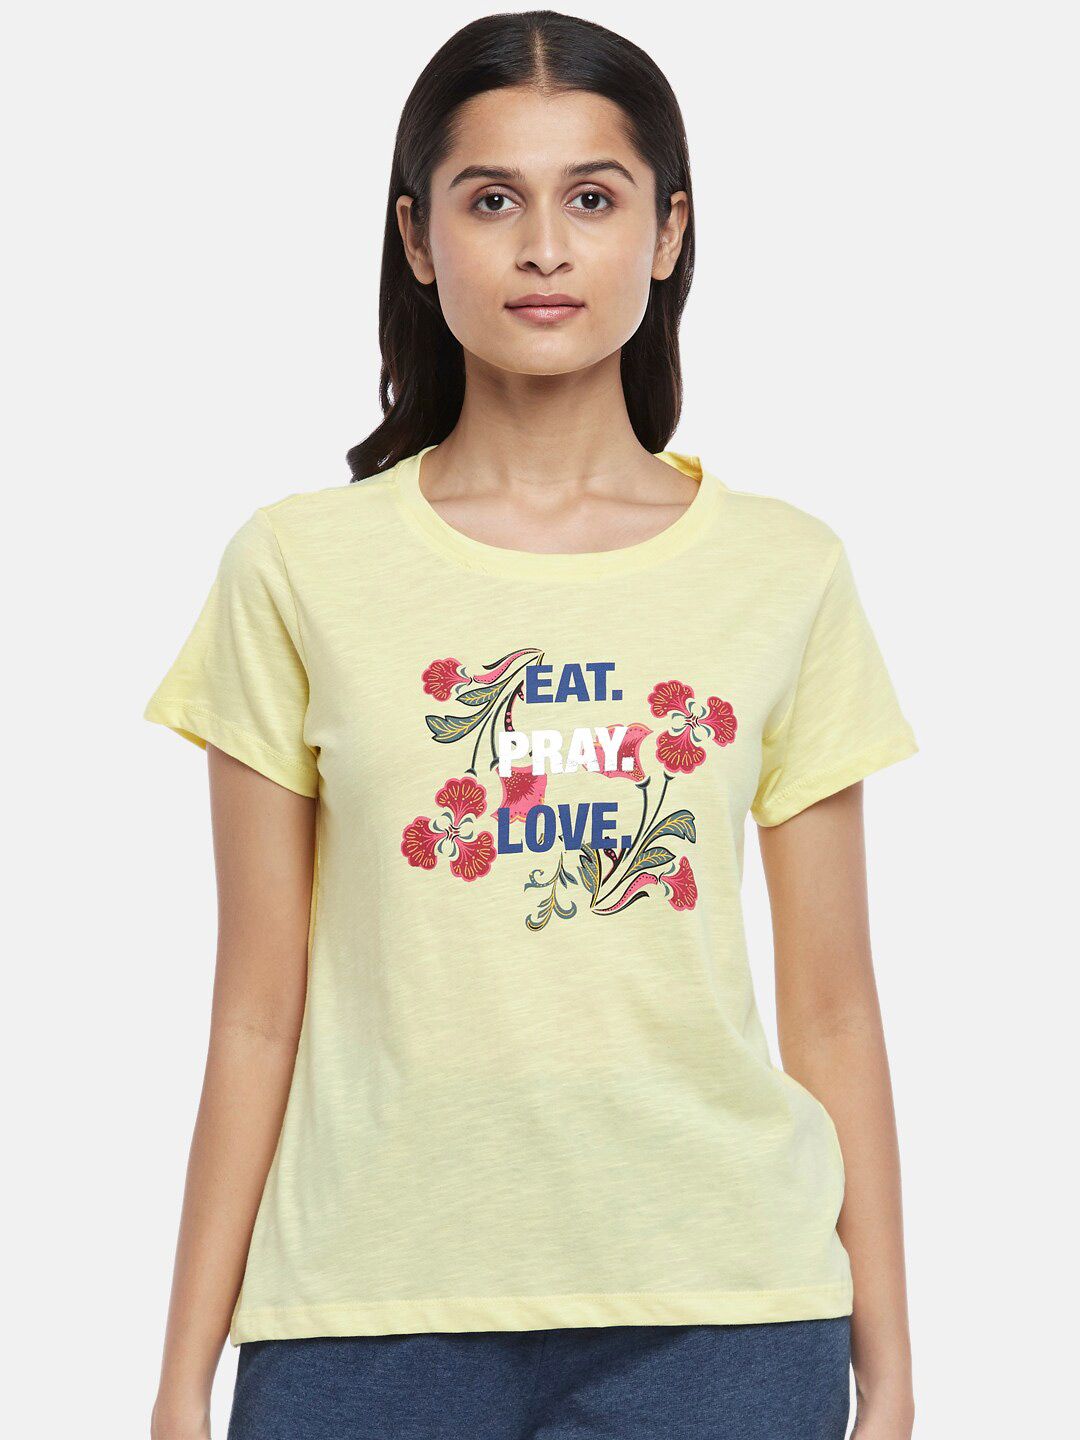 Dreamz by Pantaloons Women Yellow Printed Lounge T-shirt Price in India